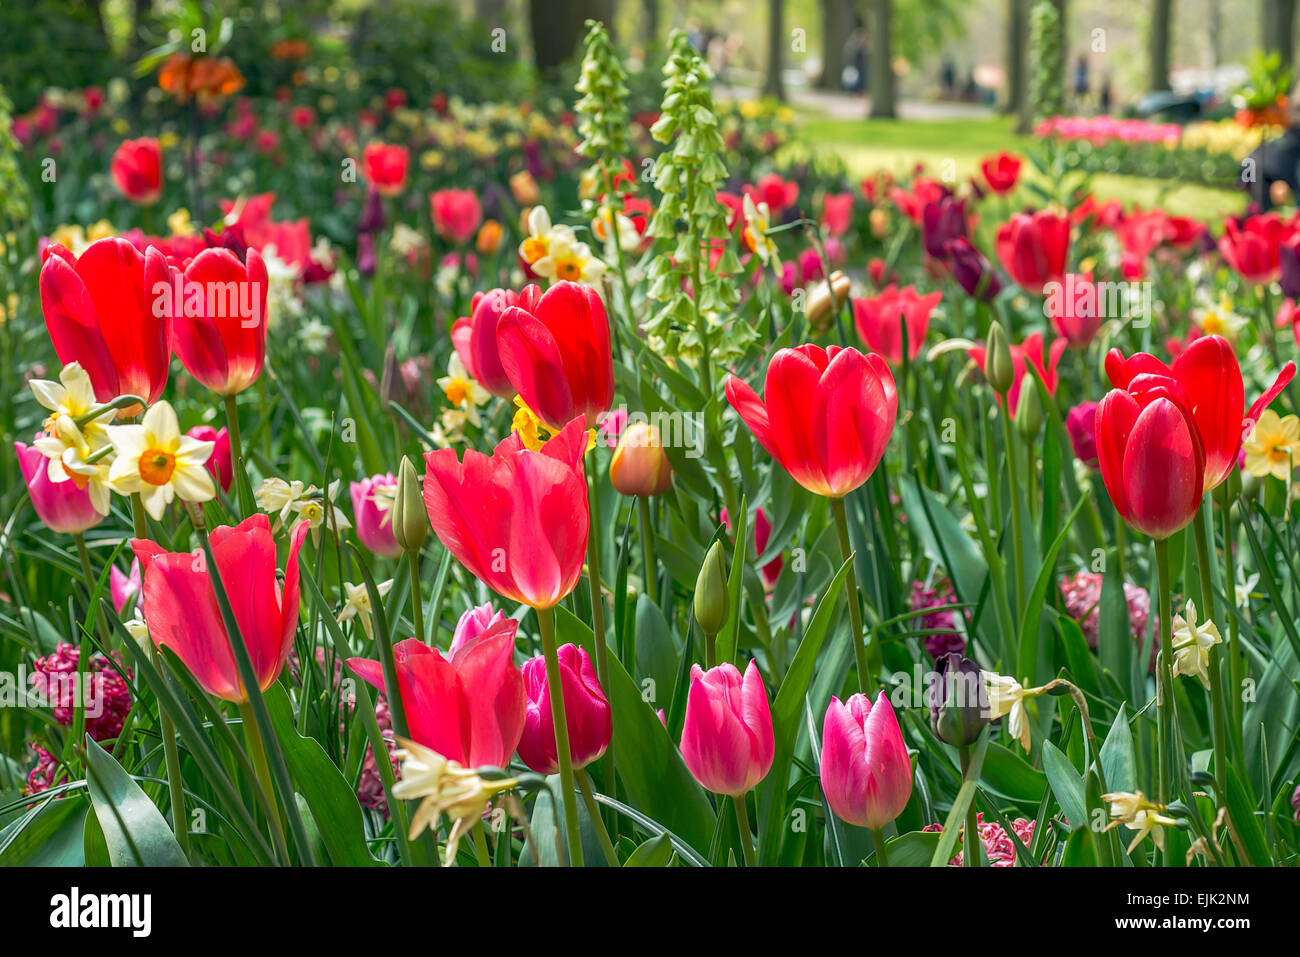 Flower bed with red tulips (Tulipa) in spring time Stock Photo